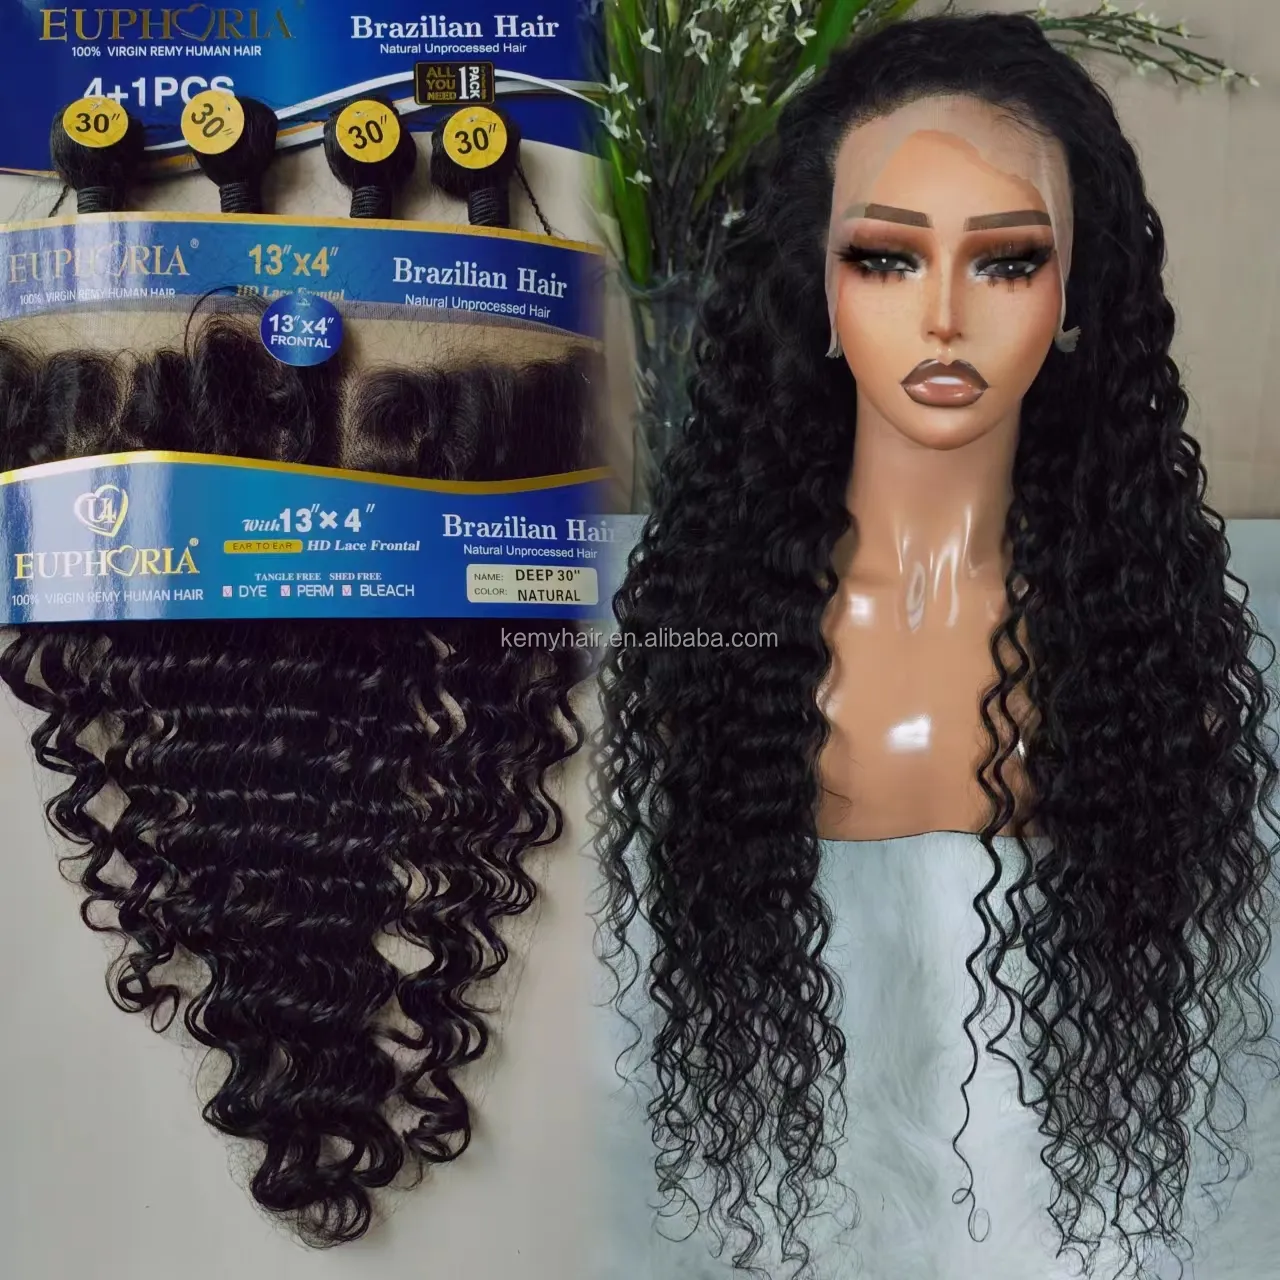 KEMY HAIR 4+1 Virgin Human Hair Wigs Bone Straight Cheap bundle with Frontal Pack Vietnamese Human Hair Lace Front Wig for Black